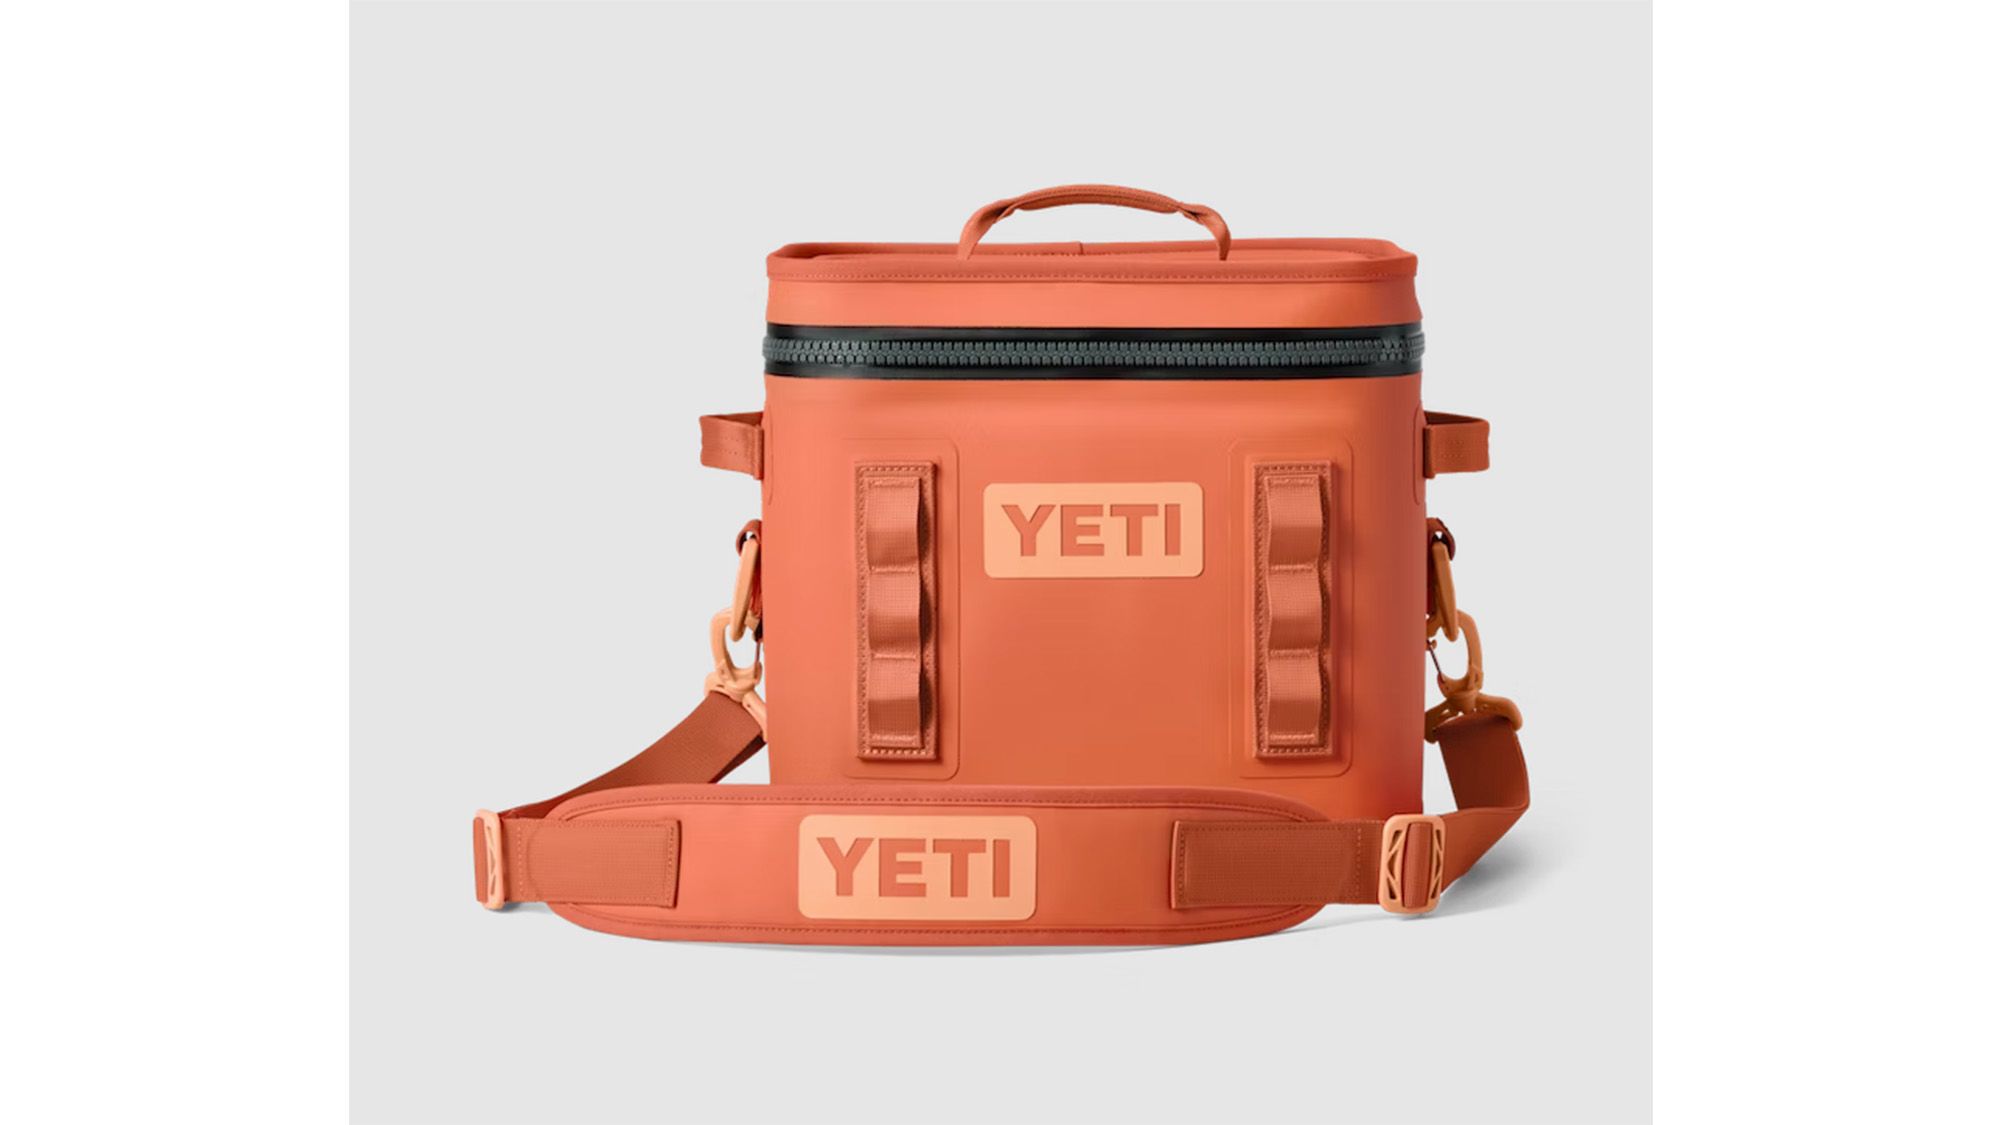 Yeti Releases Three New Colors for Spring 2021